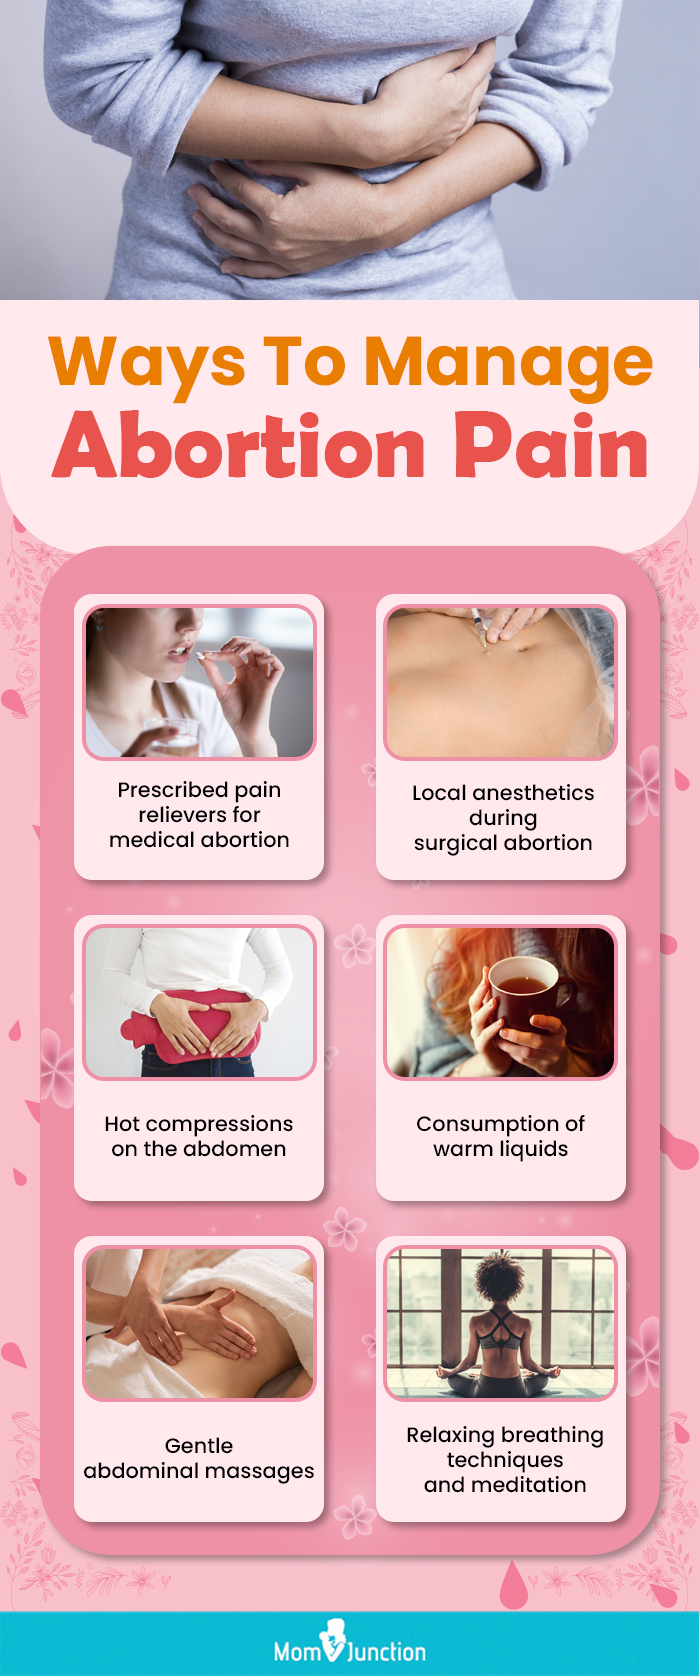 ways to manage abortion pain (infographic)